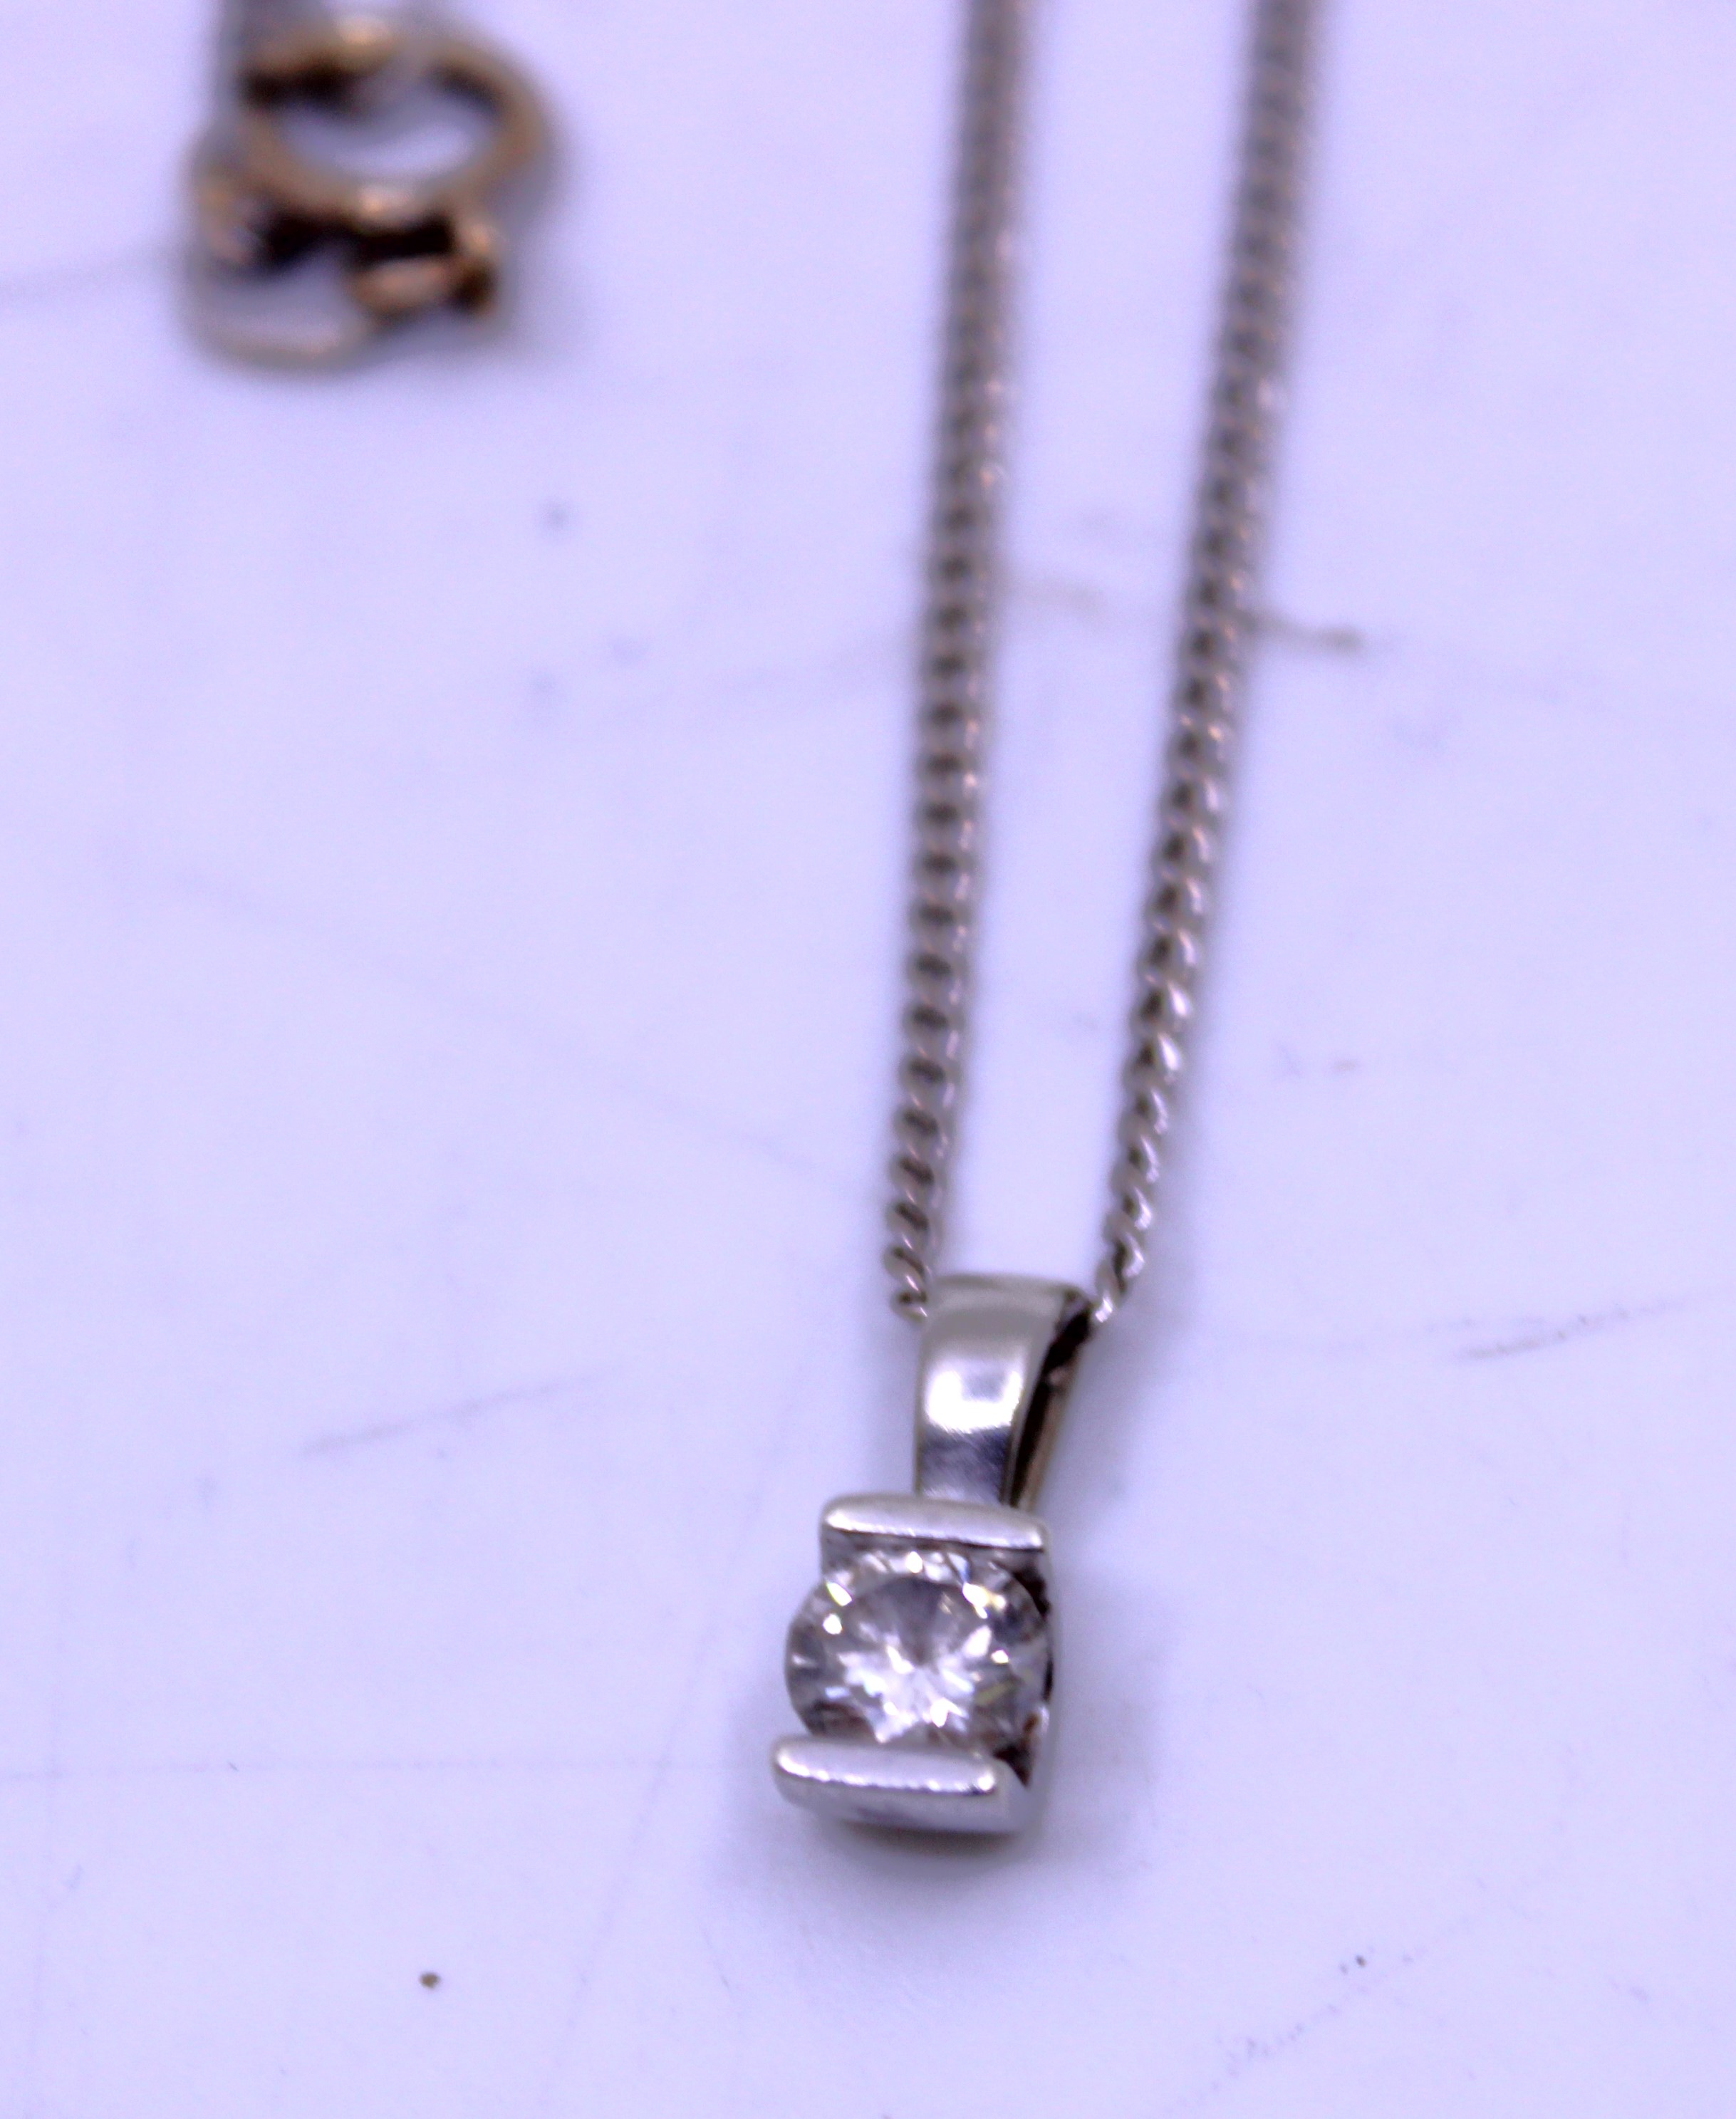 9ct White Gold 0.25ct Solitaire Round Brilliant Cut Diamond Pendant Necklace.  The Necklace is - Image 2 of 3